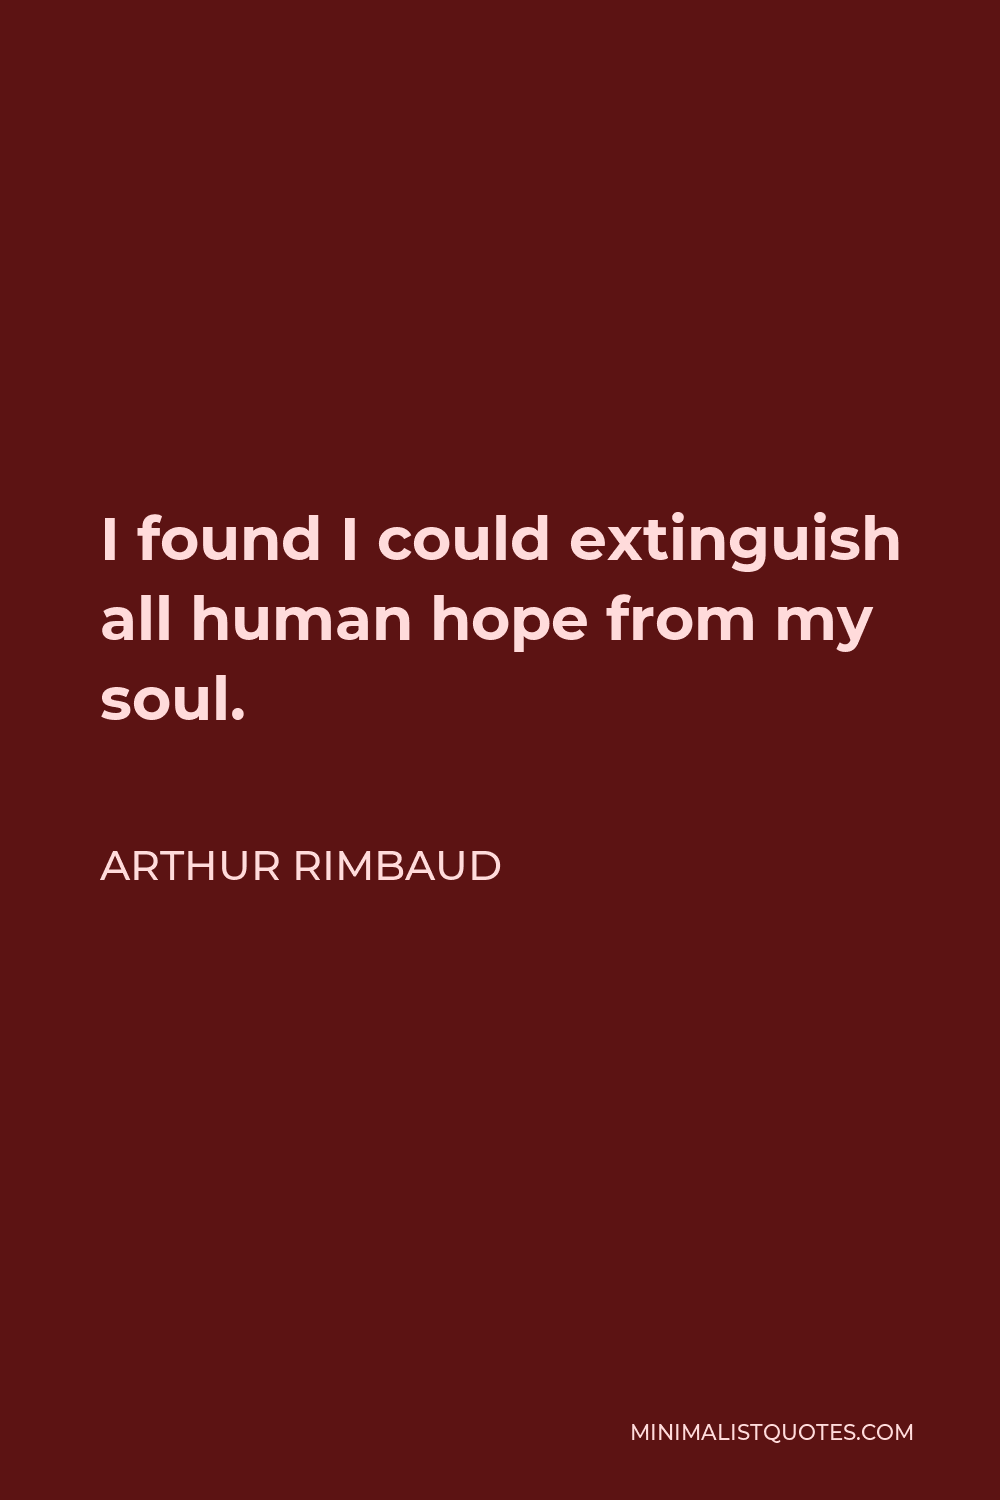 Arthur Rimbaud Quote - I found I could extinguish all human hope from my soul.